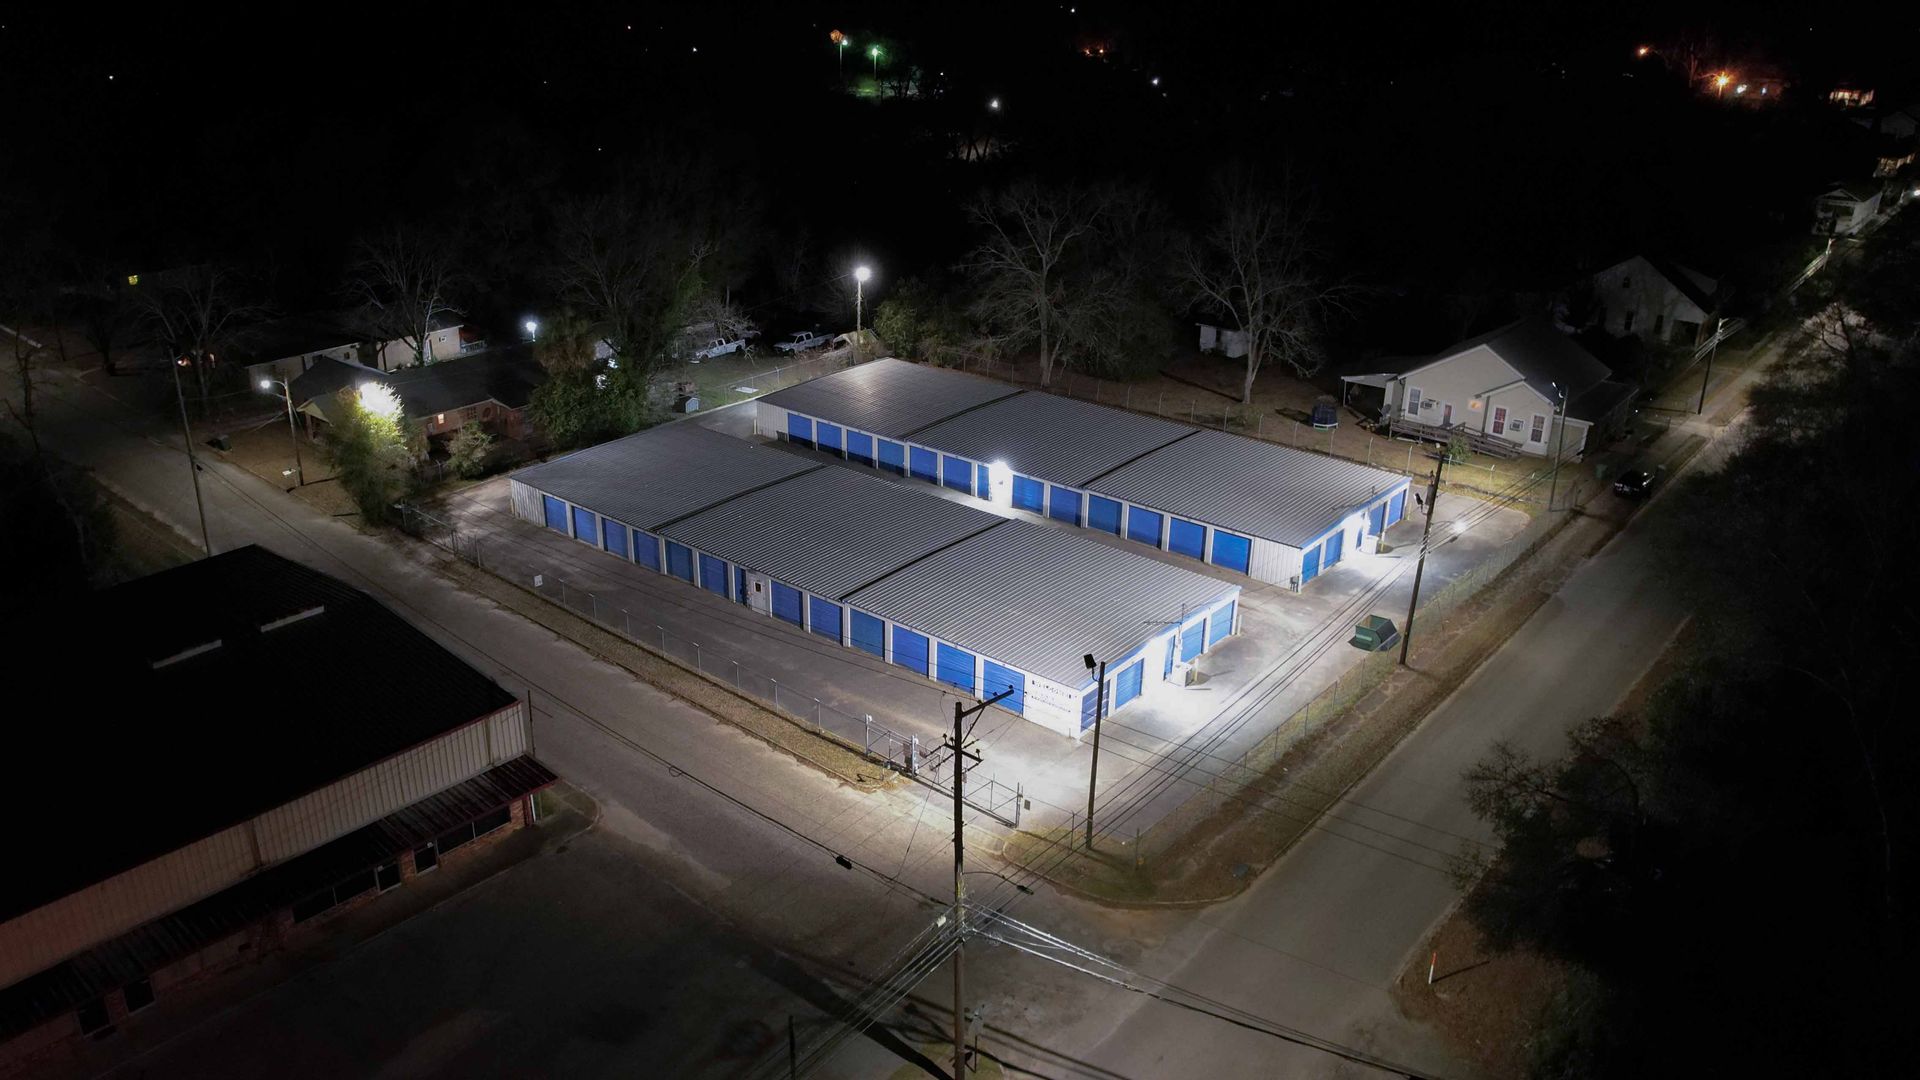 A night time Aerial View of a storage facility that has lights